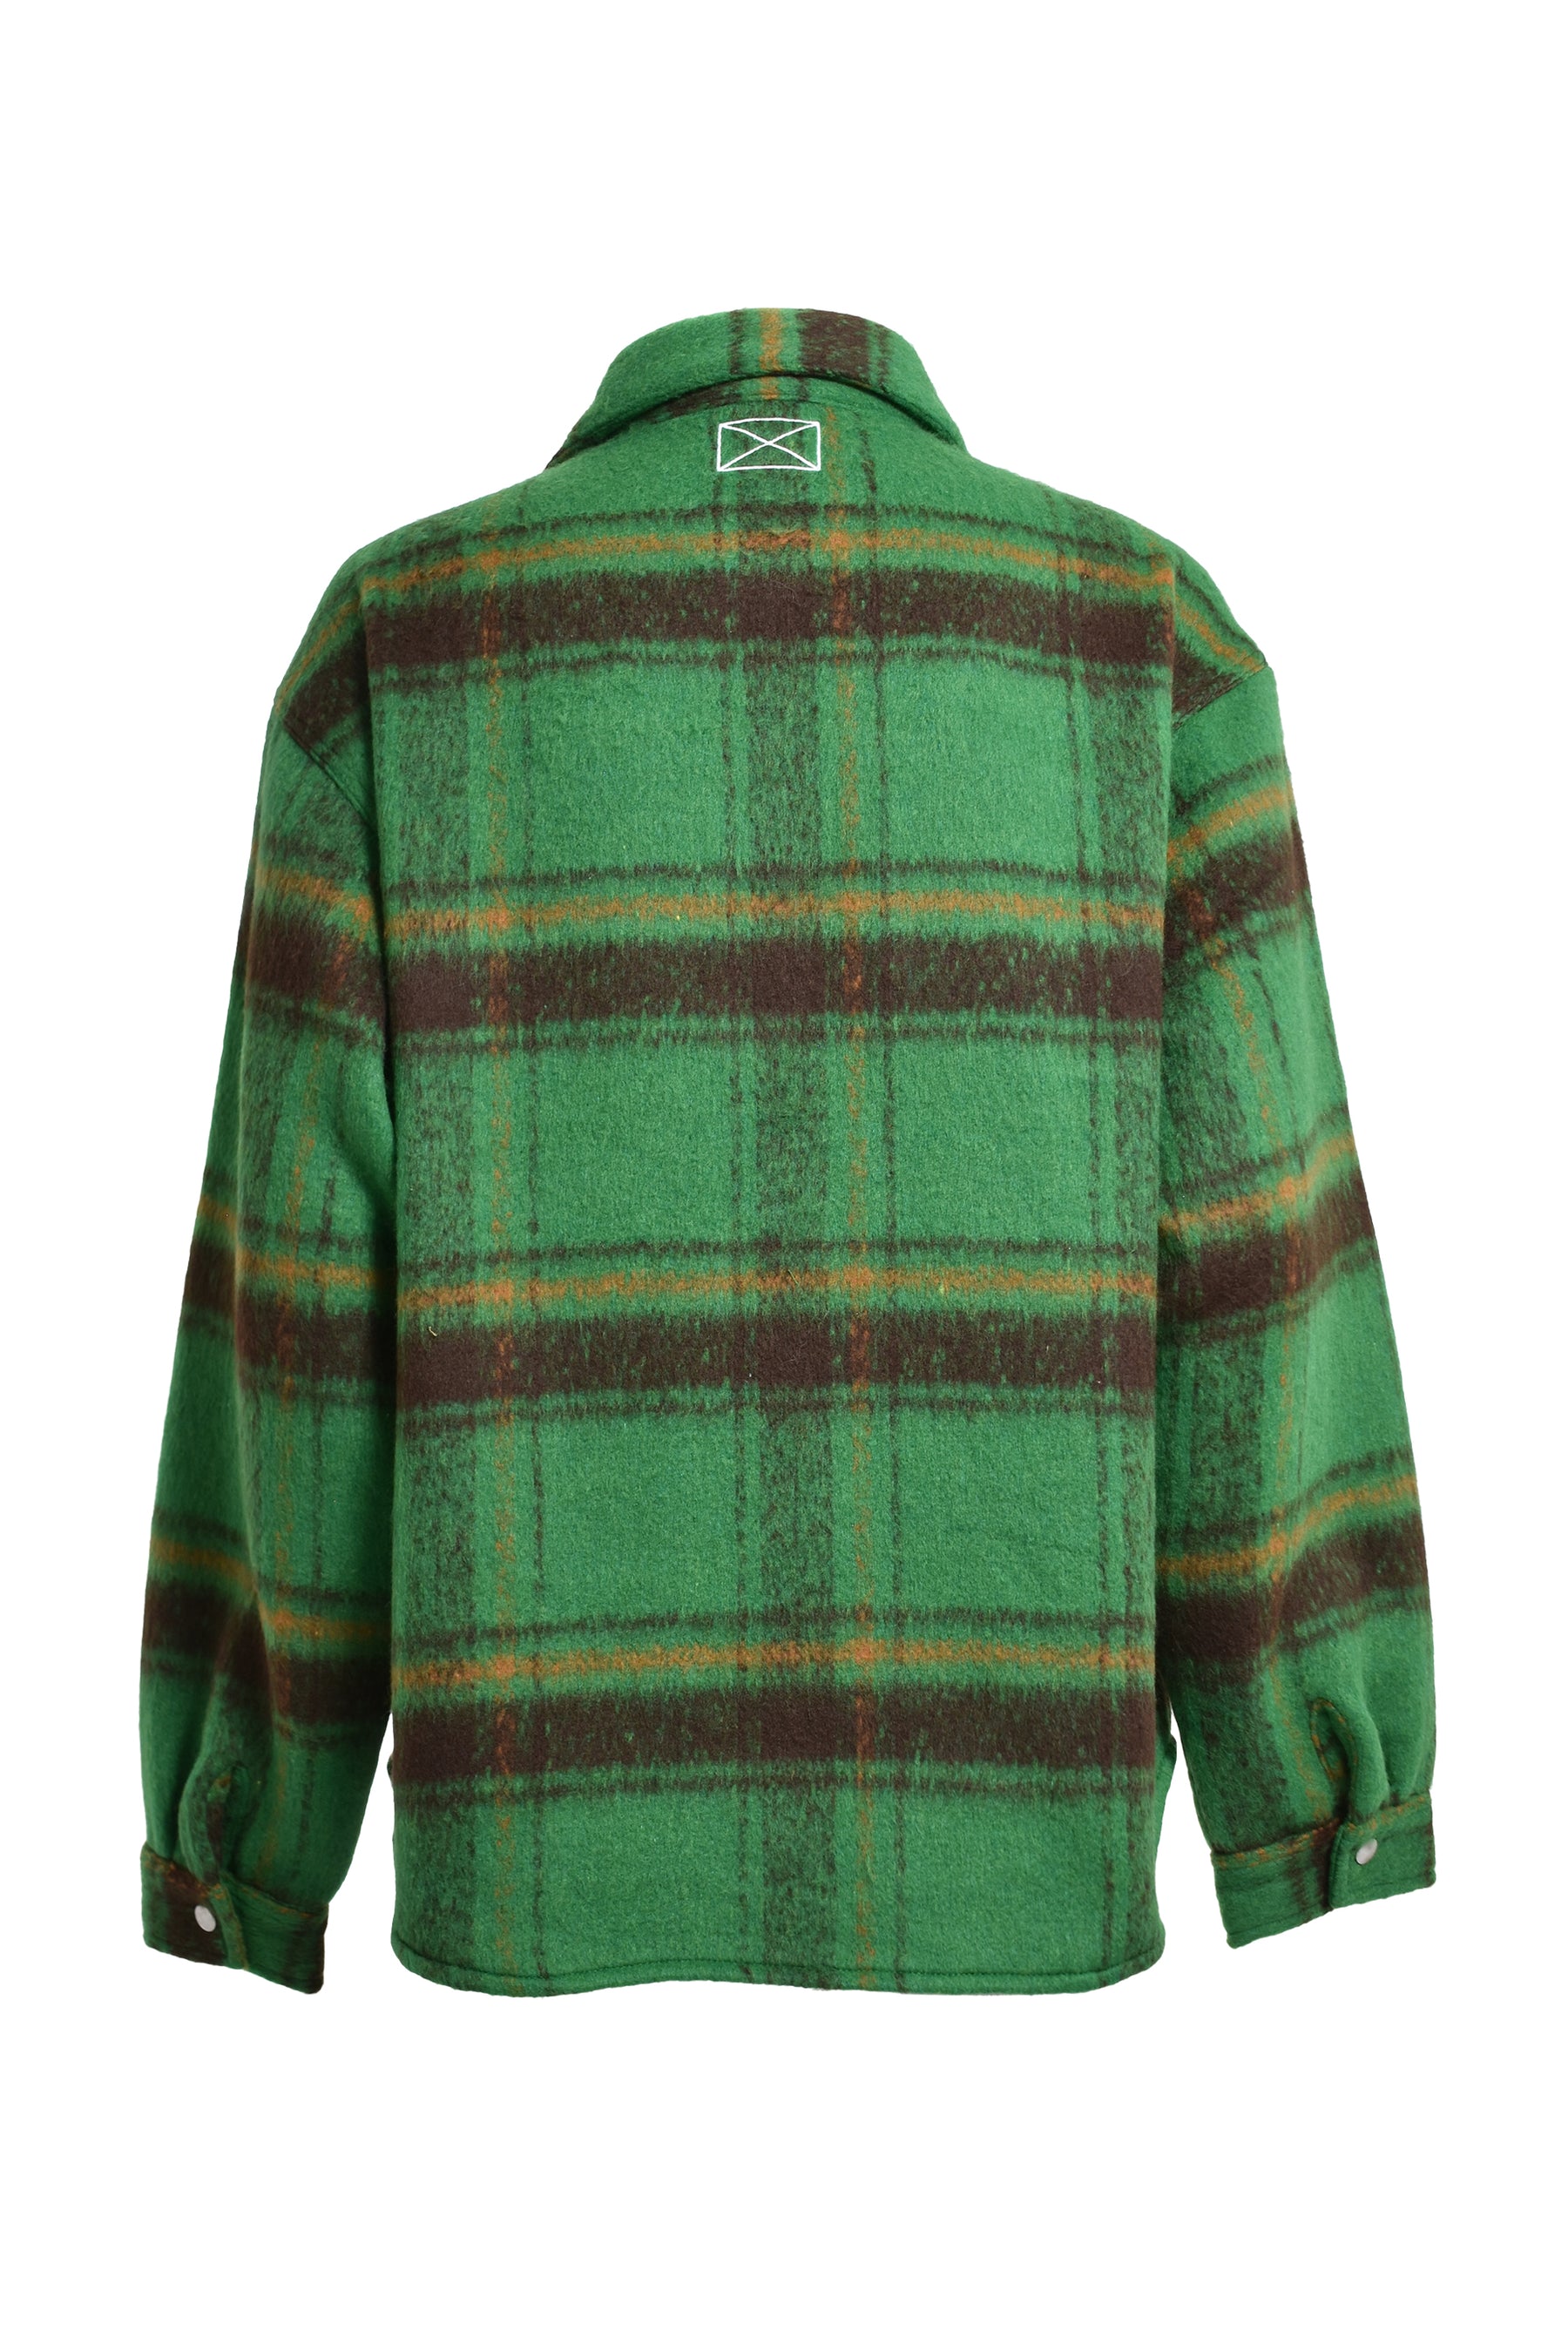 MLVINCE メルヴィンス FW23 OVERSIZED CHECK JACKET / GRN -NUBIAN